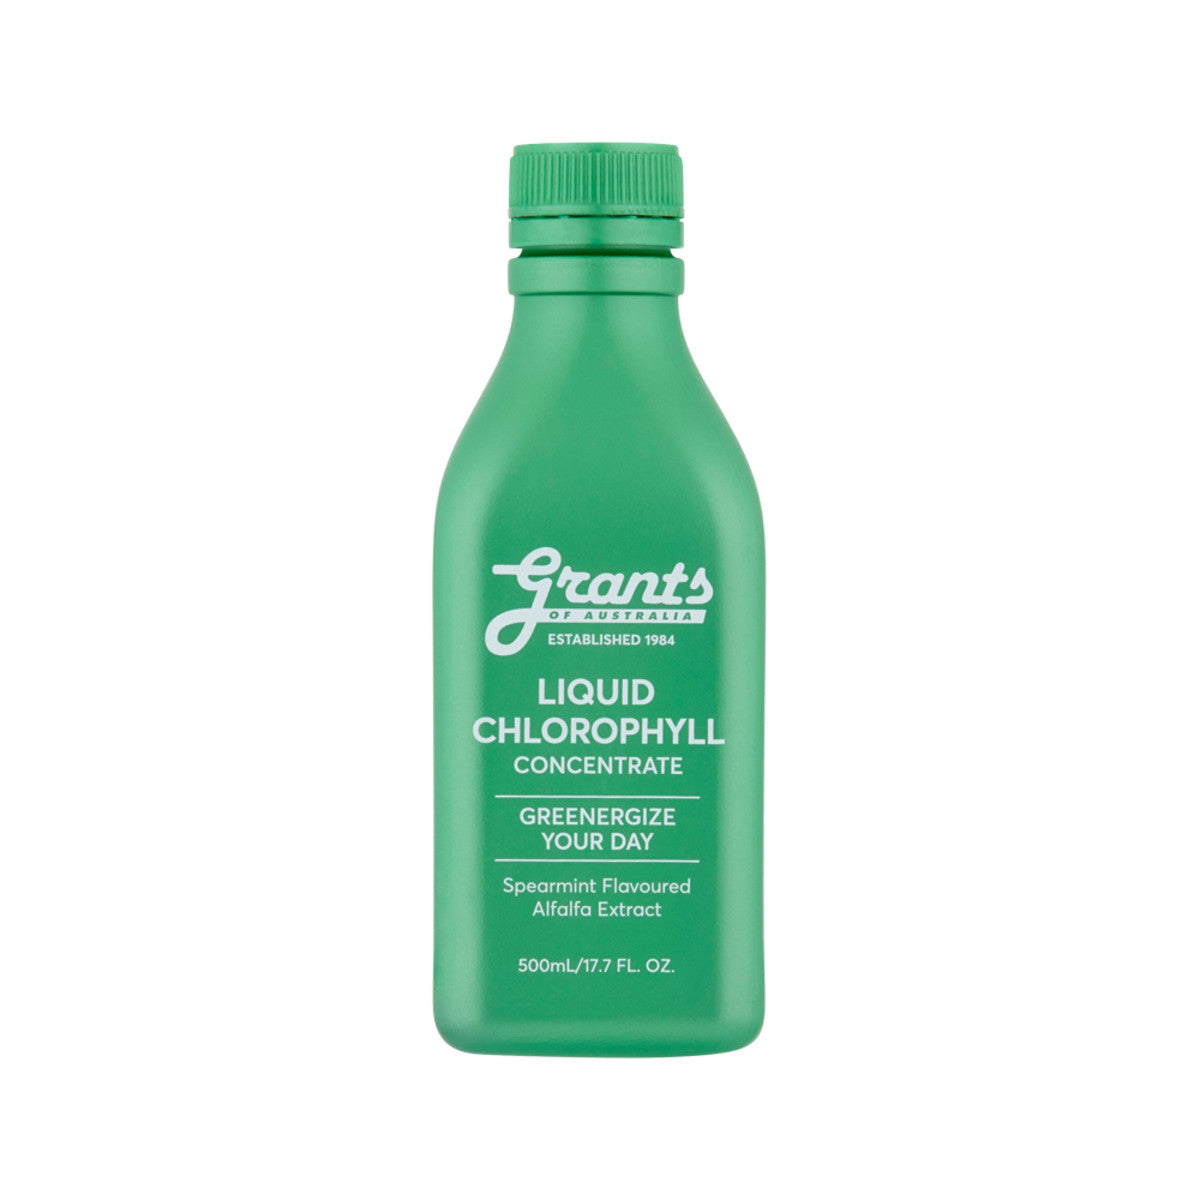 Grants - Liquid Chlorophyll Concentrate